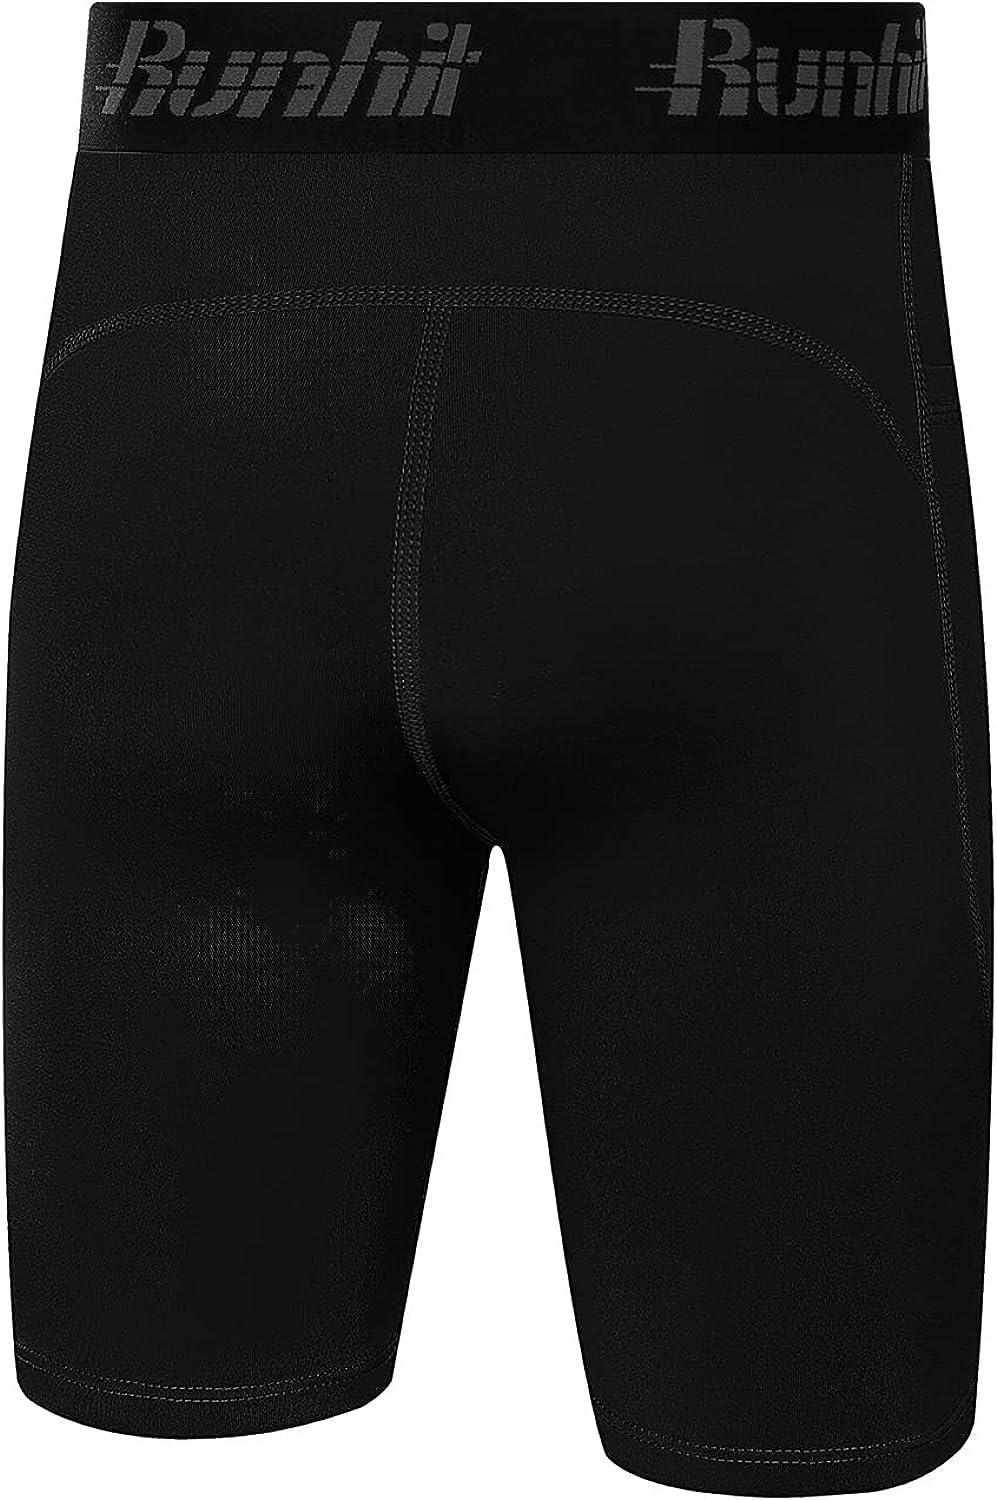 NIKE PRO COOL YOUTH COMPRESSION SHORT - Sports Contact